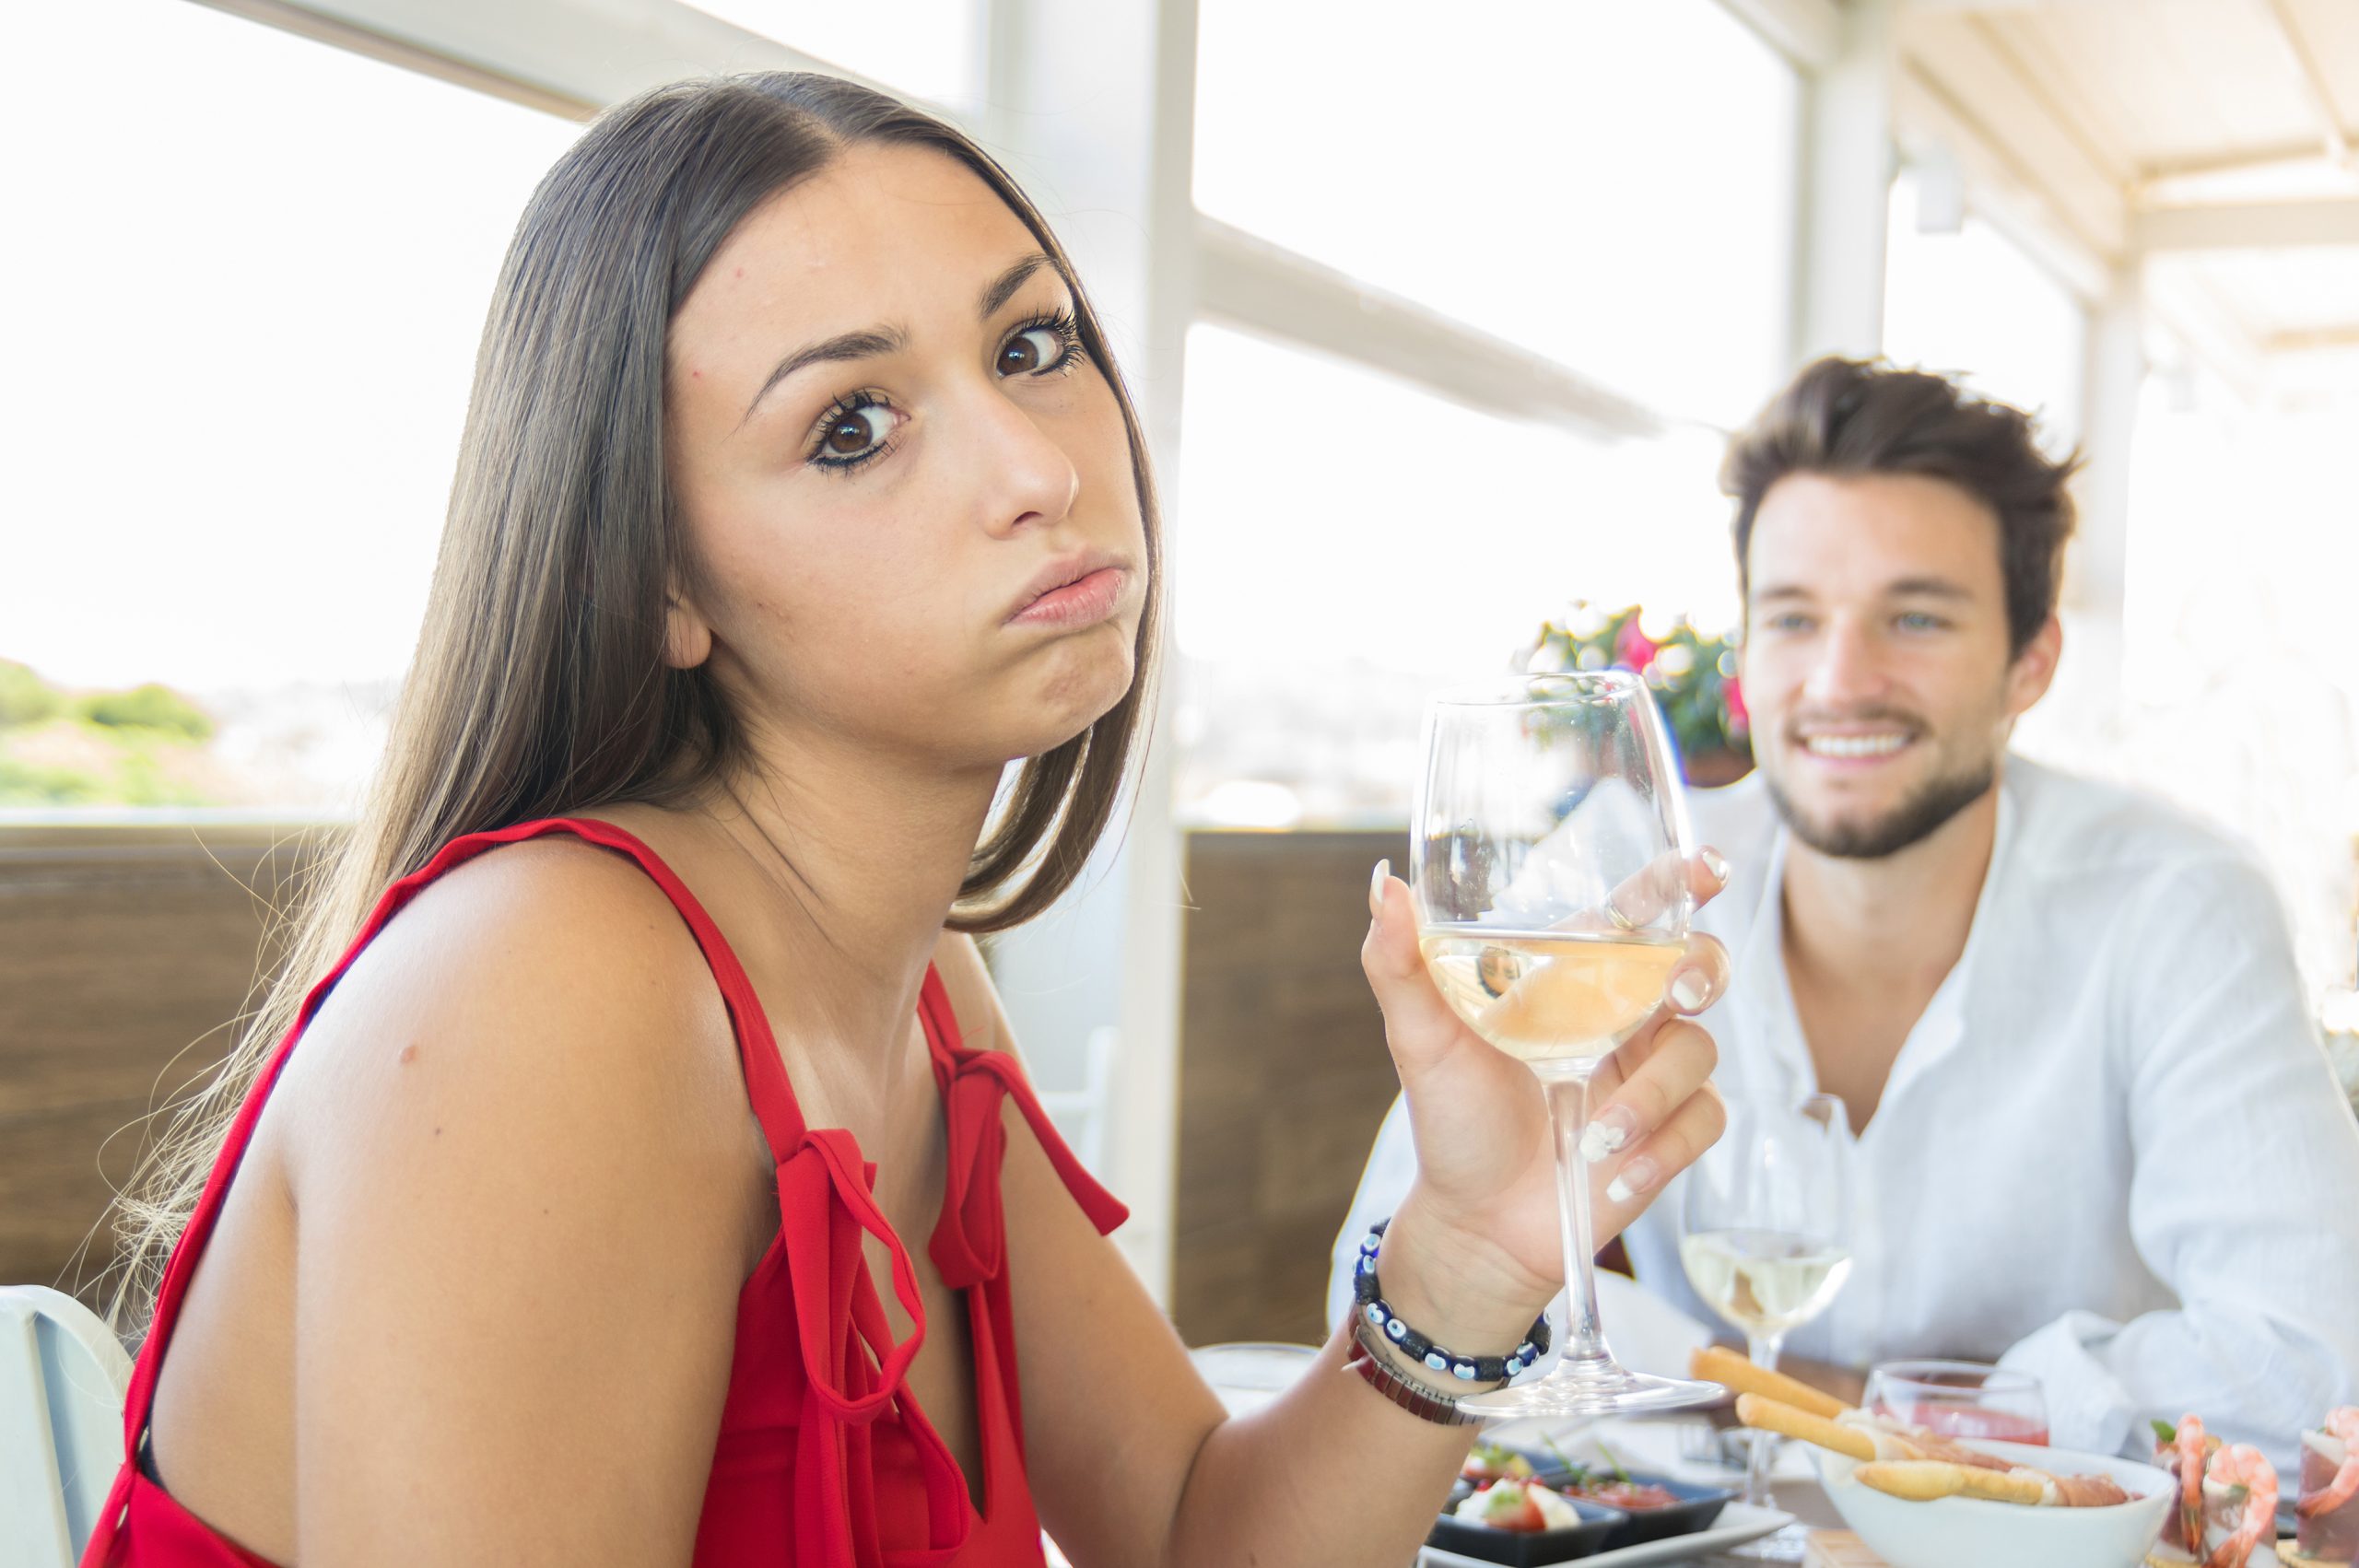 Seven signs you shouldn’t hook-up with them